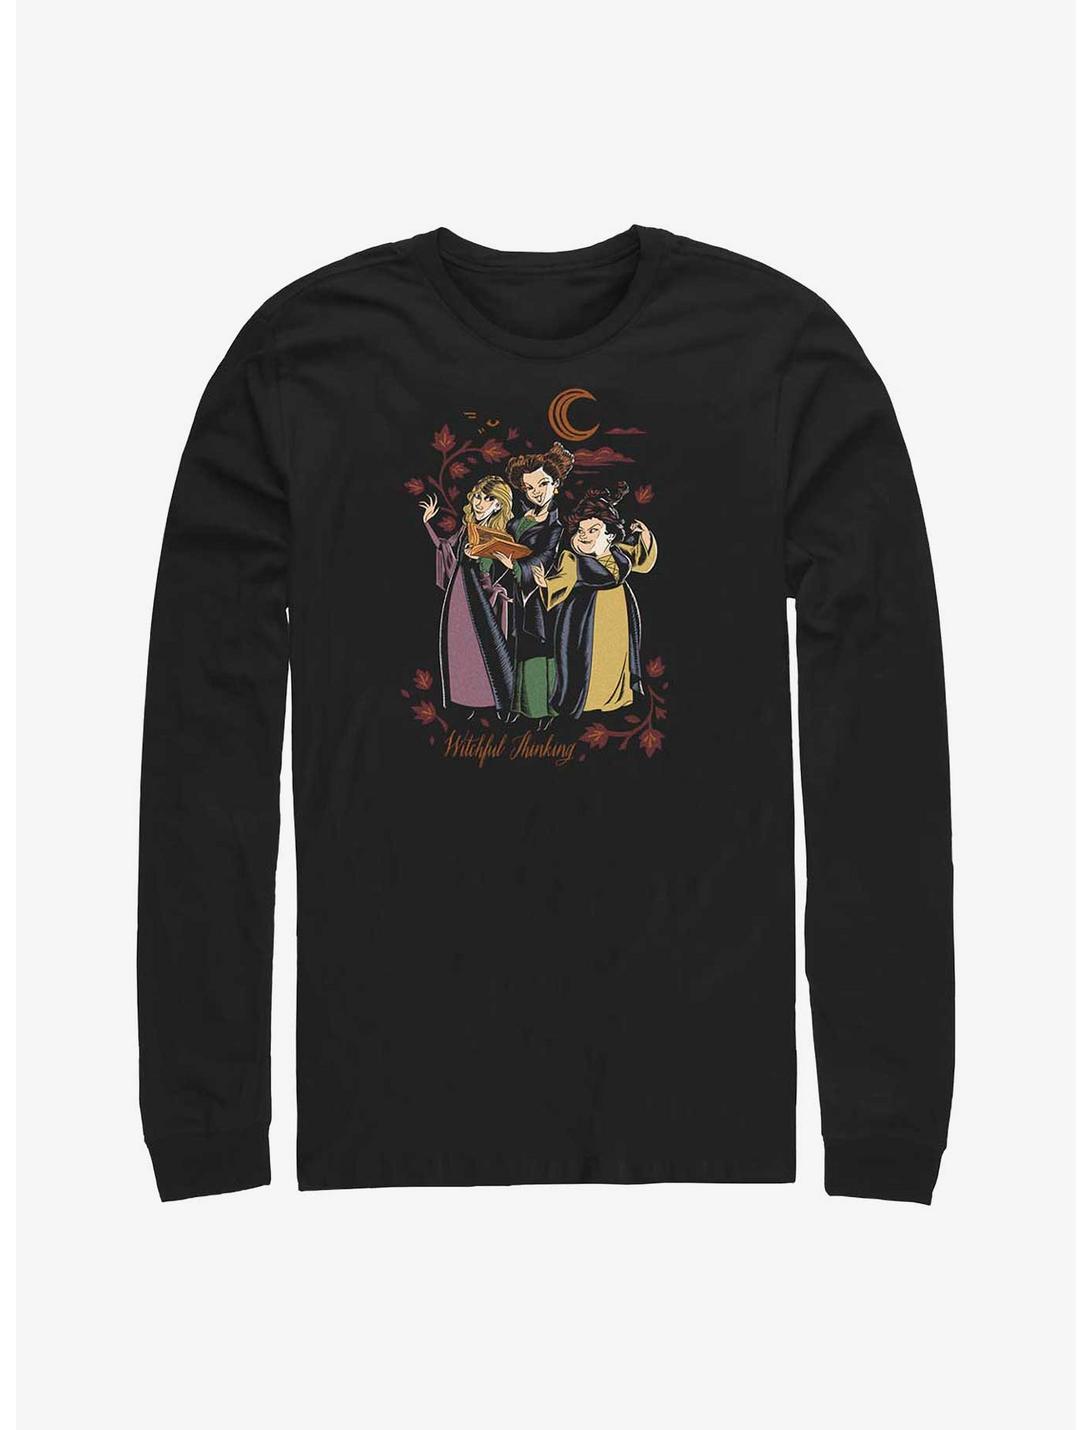 Disney Hocus Pocus 2 Witchful Thinking Sisters Long-Sleeve T-Shirt, BLACK, hi-res